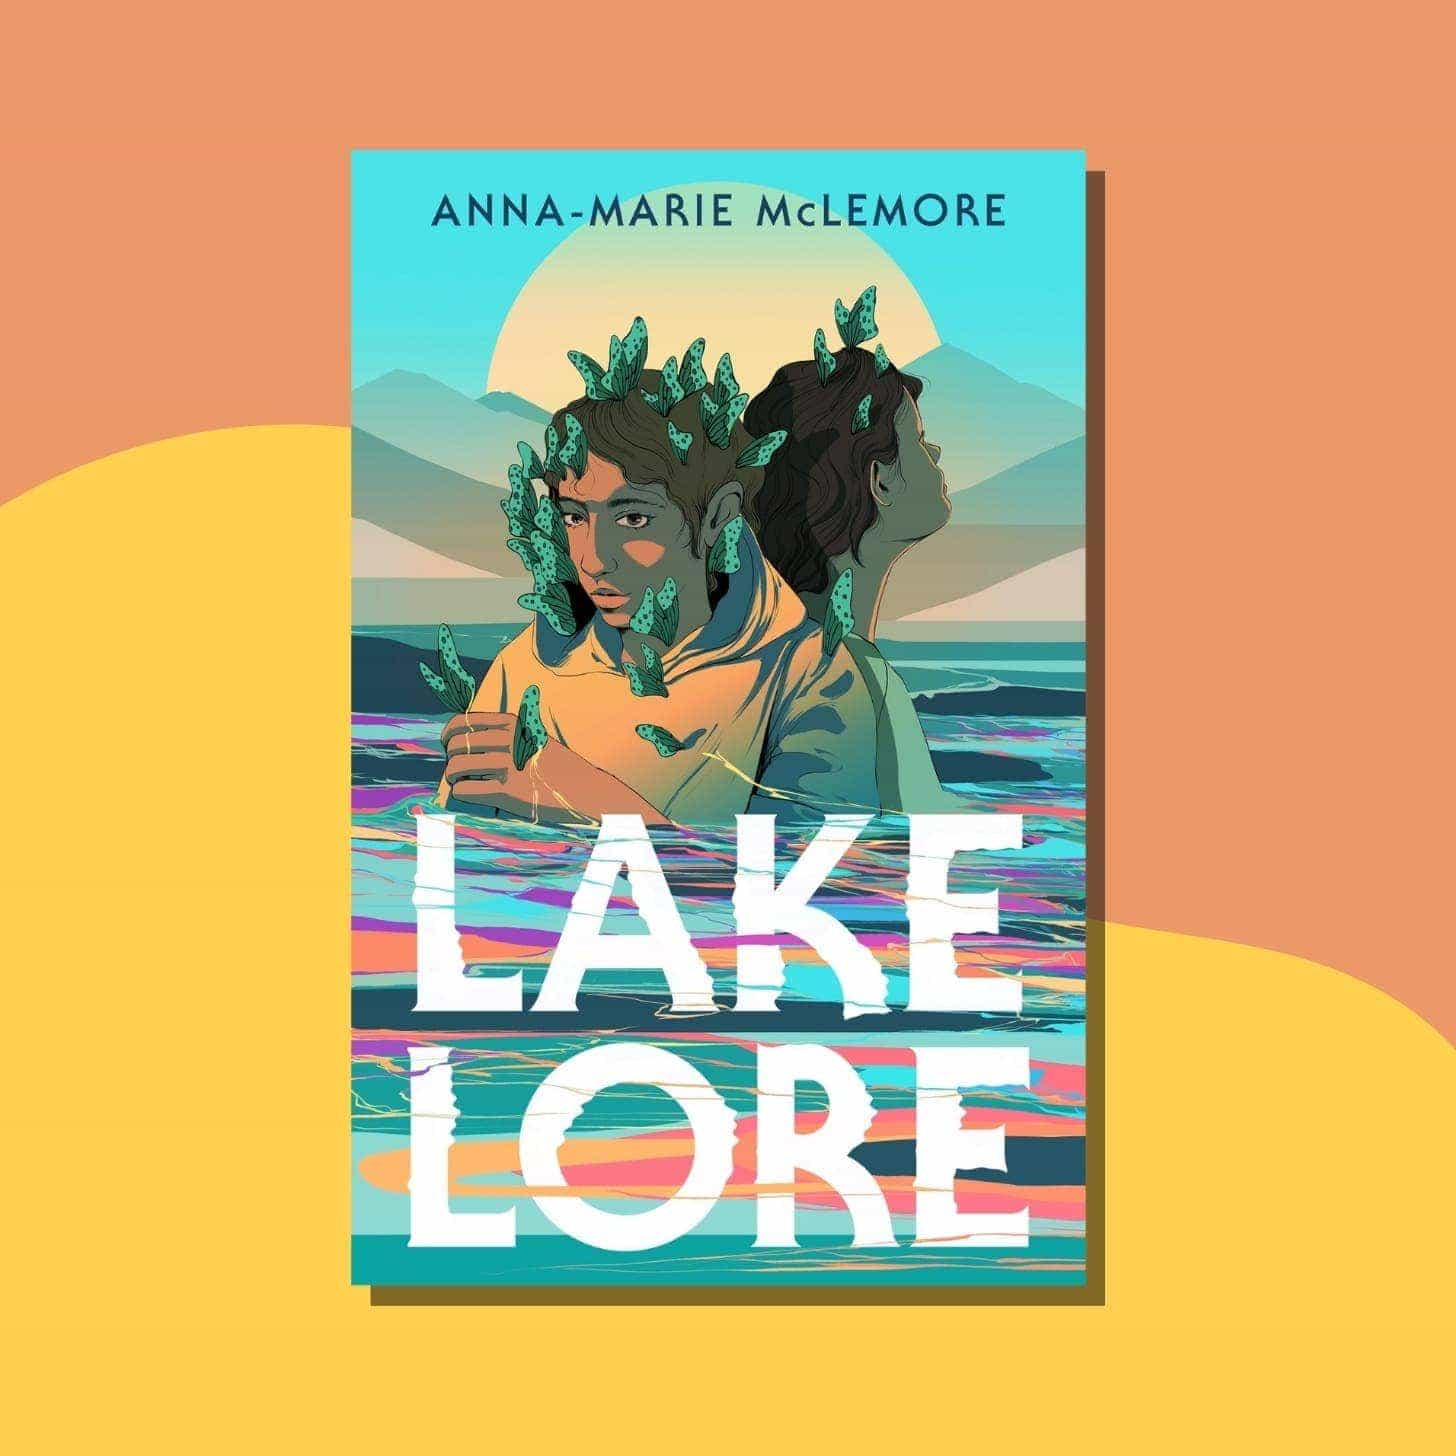 “Lakelore” by Anna-Marie McLemore - Cover has two characters with in the water with blue butterflies landing on them